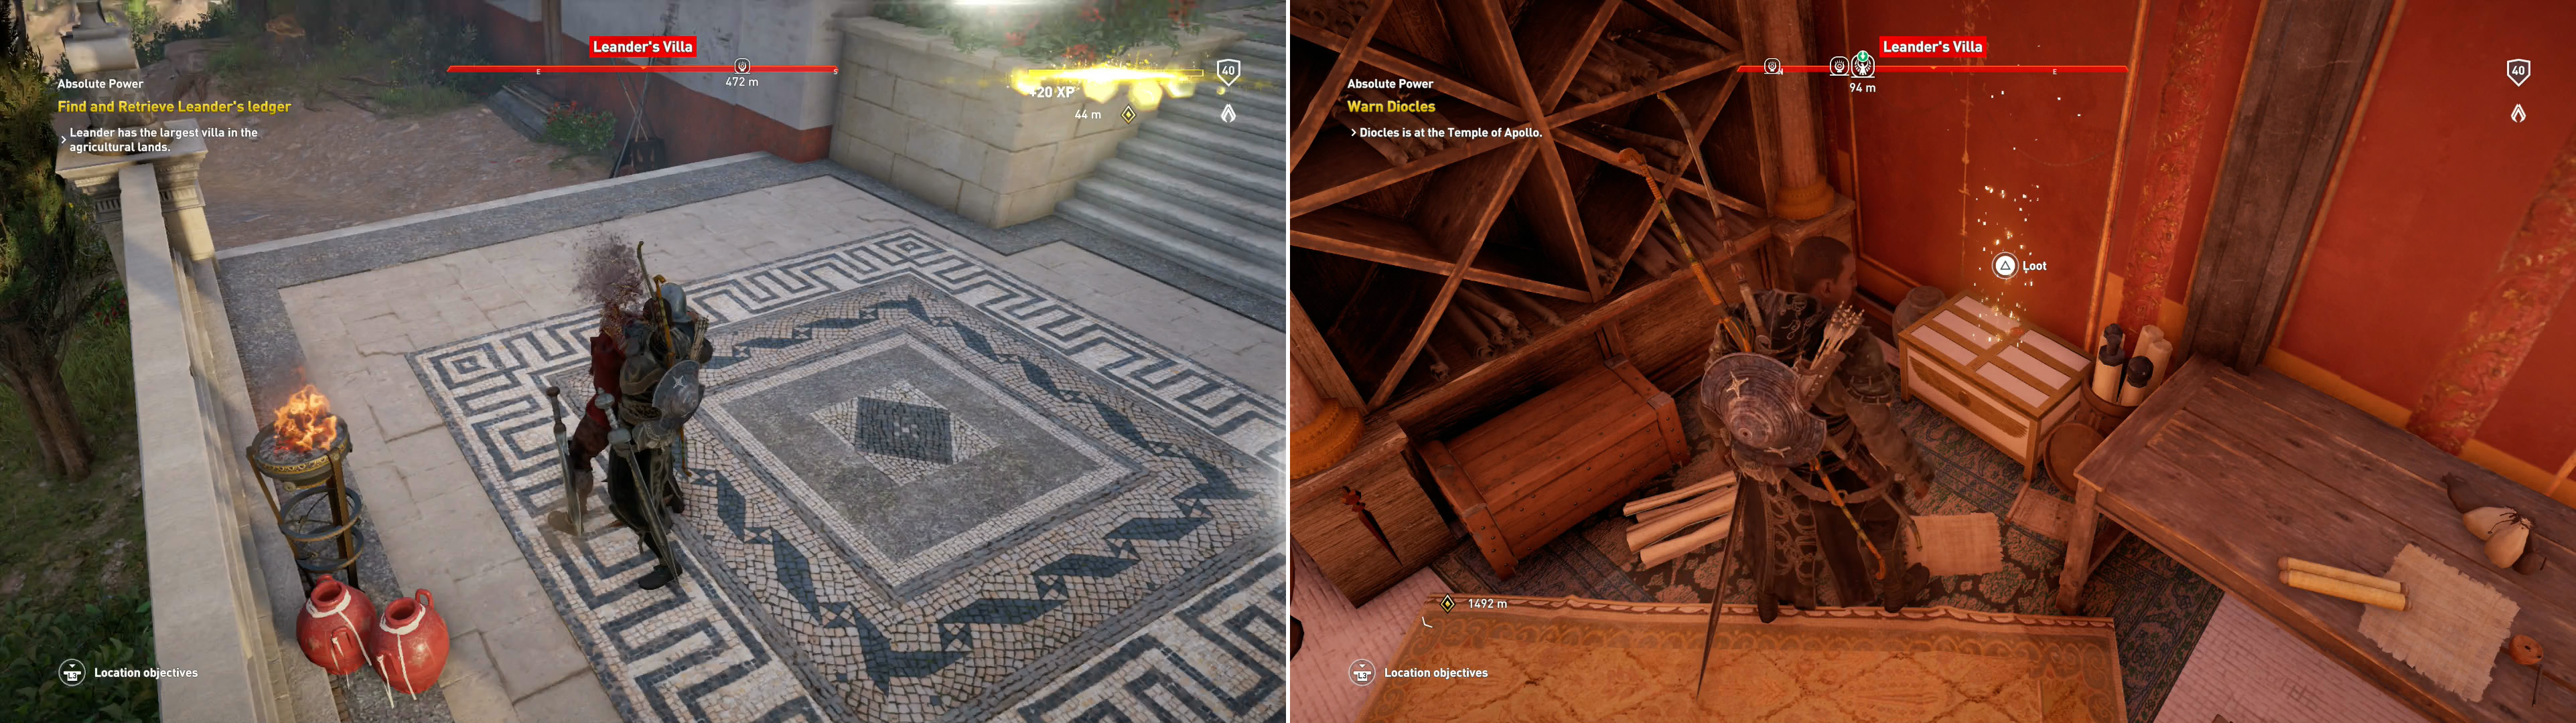 Kill the soldiers at Leander's Villa (left), then search the estate to find the intel Simonides told you about (right).